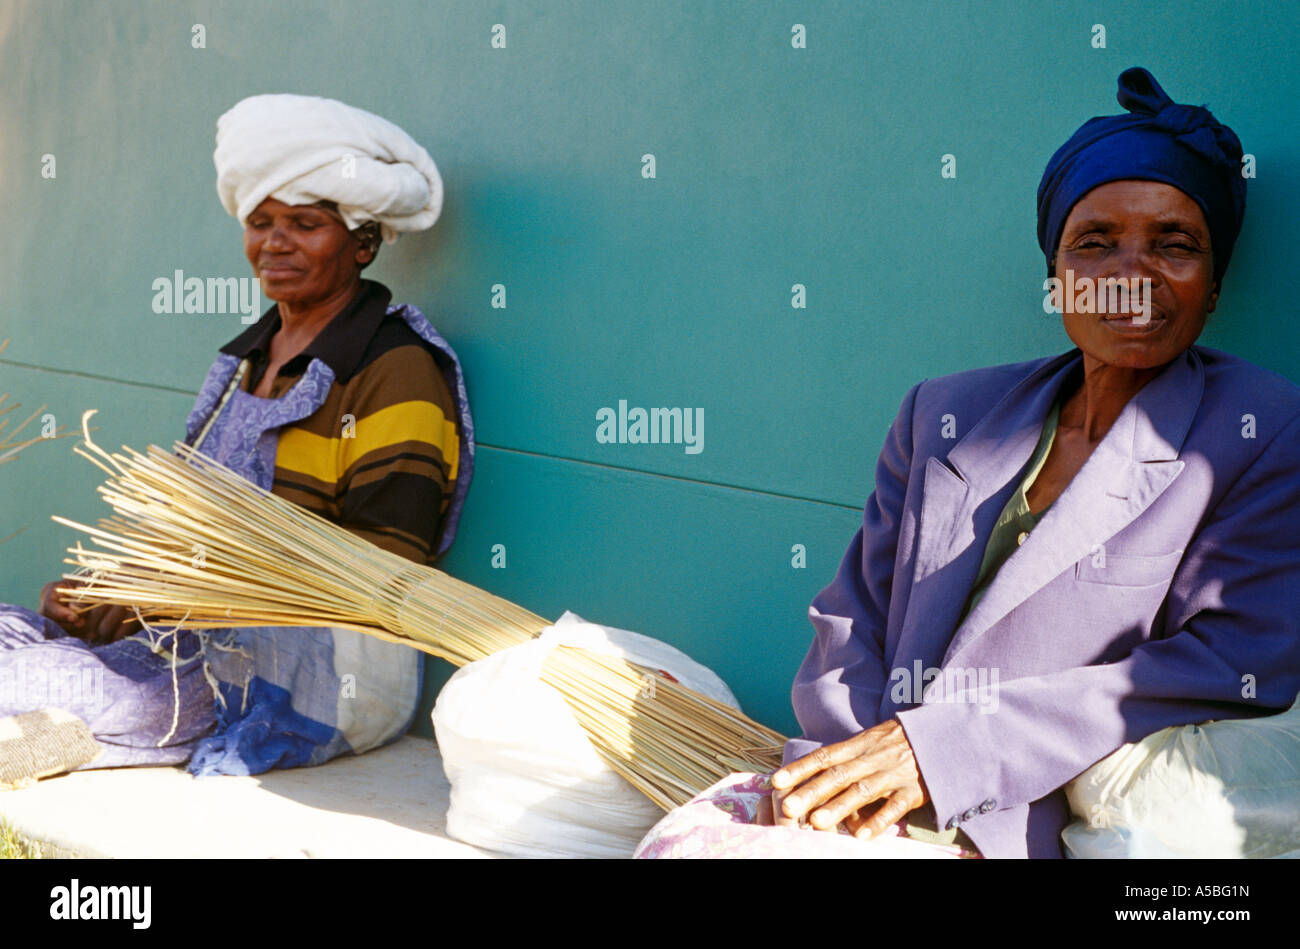 Two women sitting together in South Africa Stock Photo